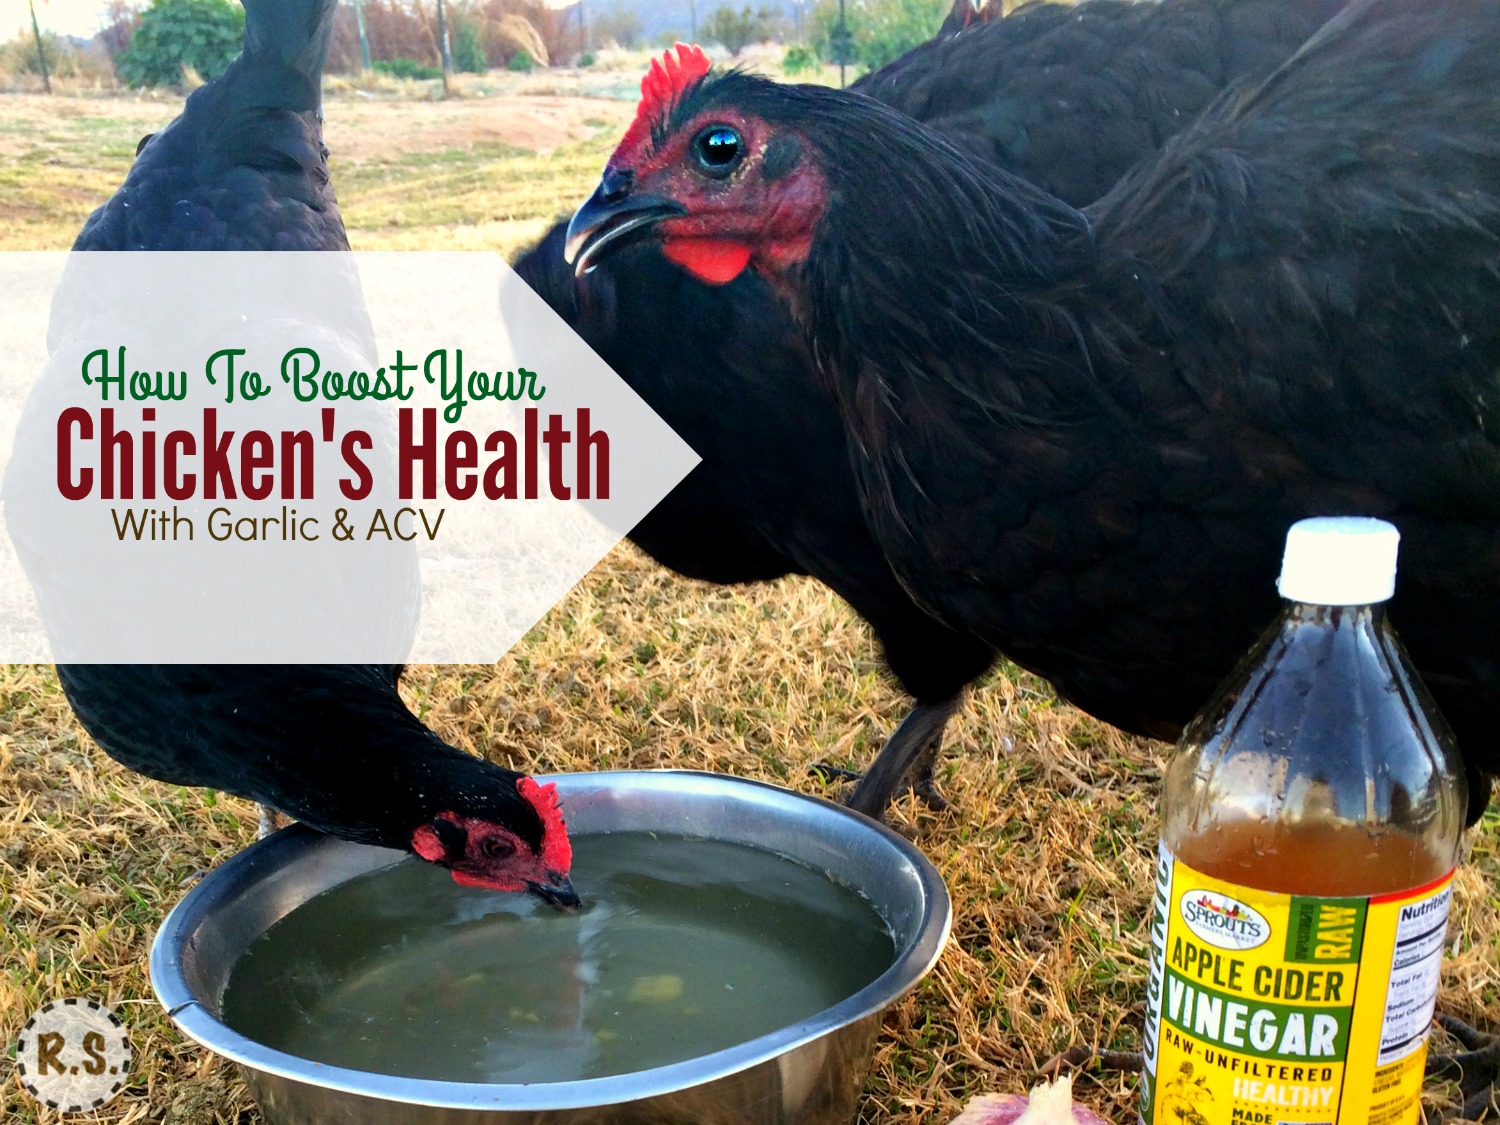 Improve your backyard chicken health, by feeding your hens garlic & apple cider vinegar. It’s great for their health. And I’ll show you how easy it is to start feeding it to your hens today.